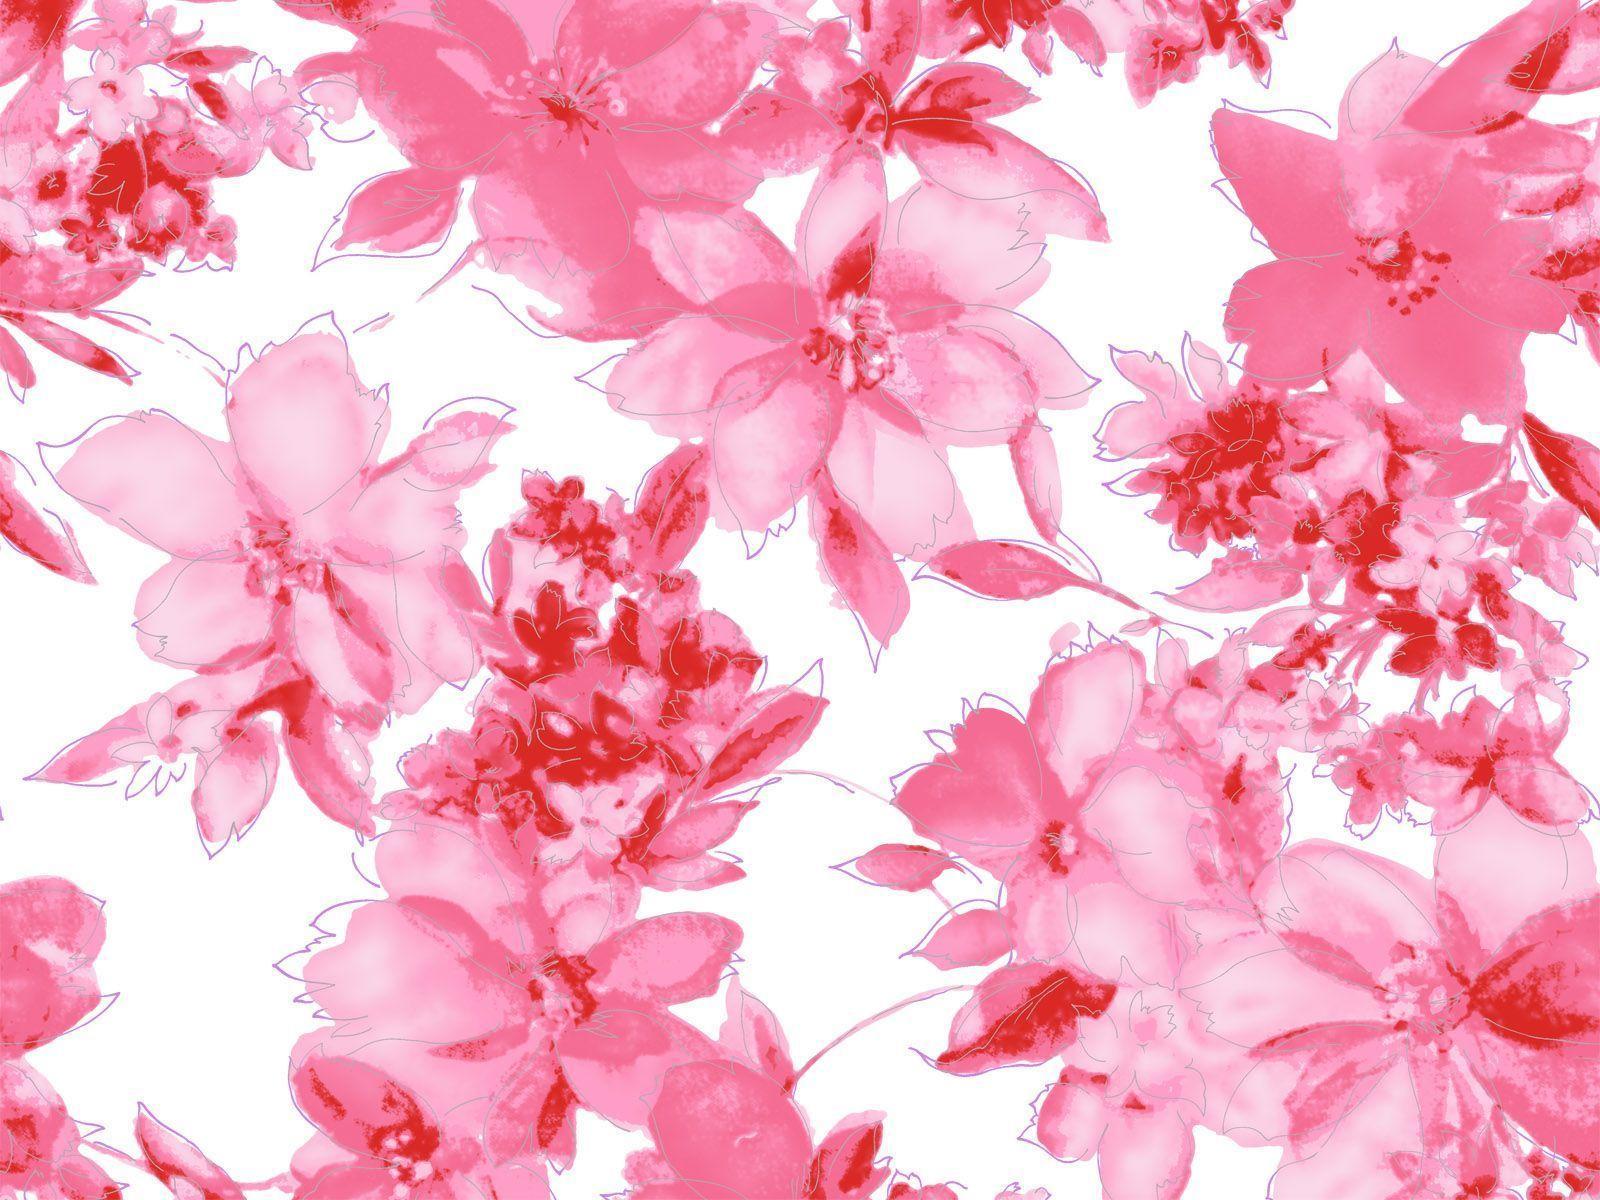 Pink wallpaper HD image free download for computers